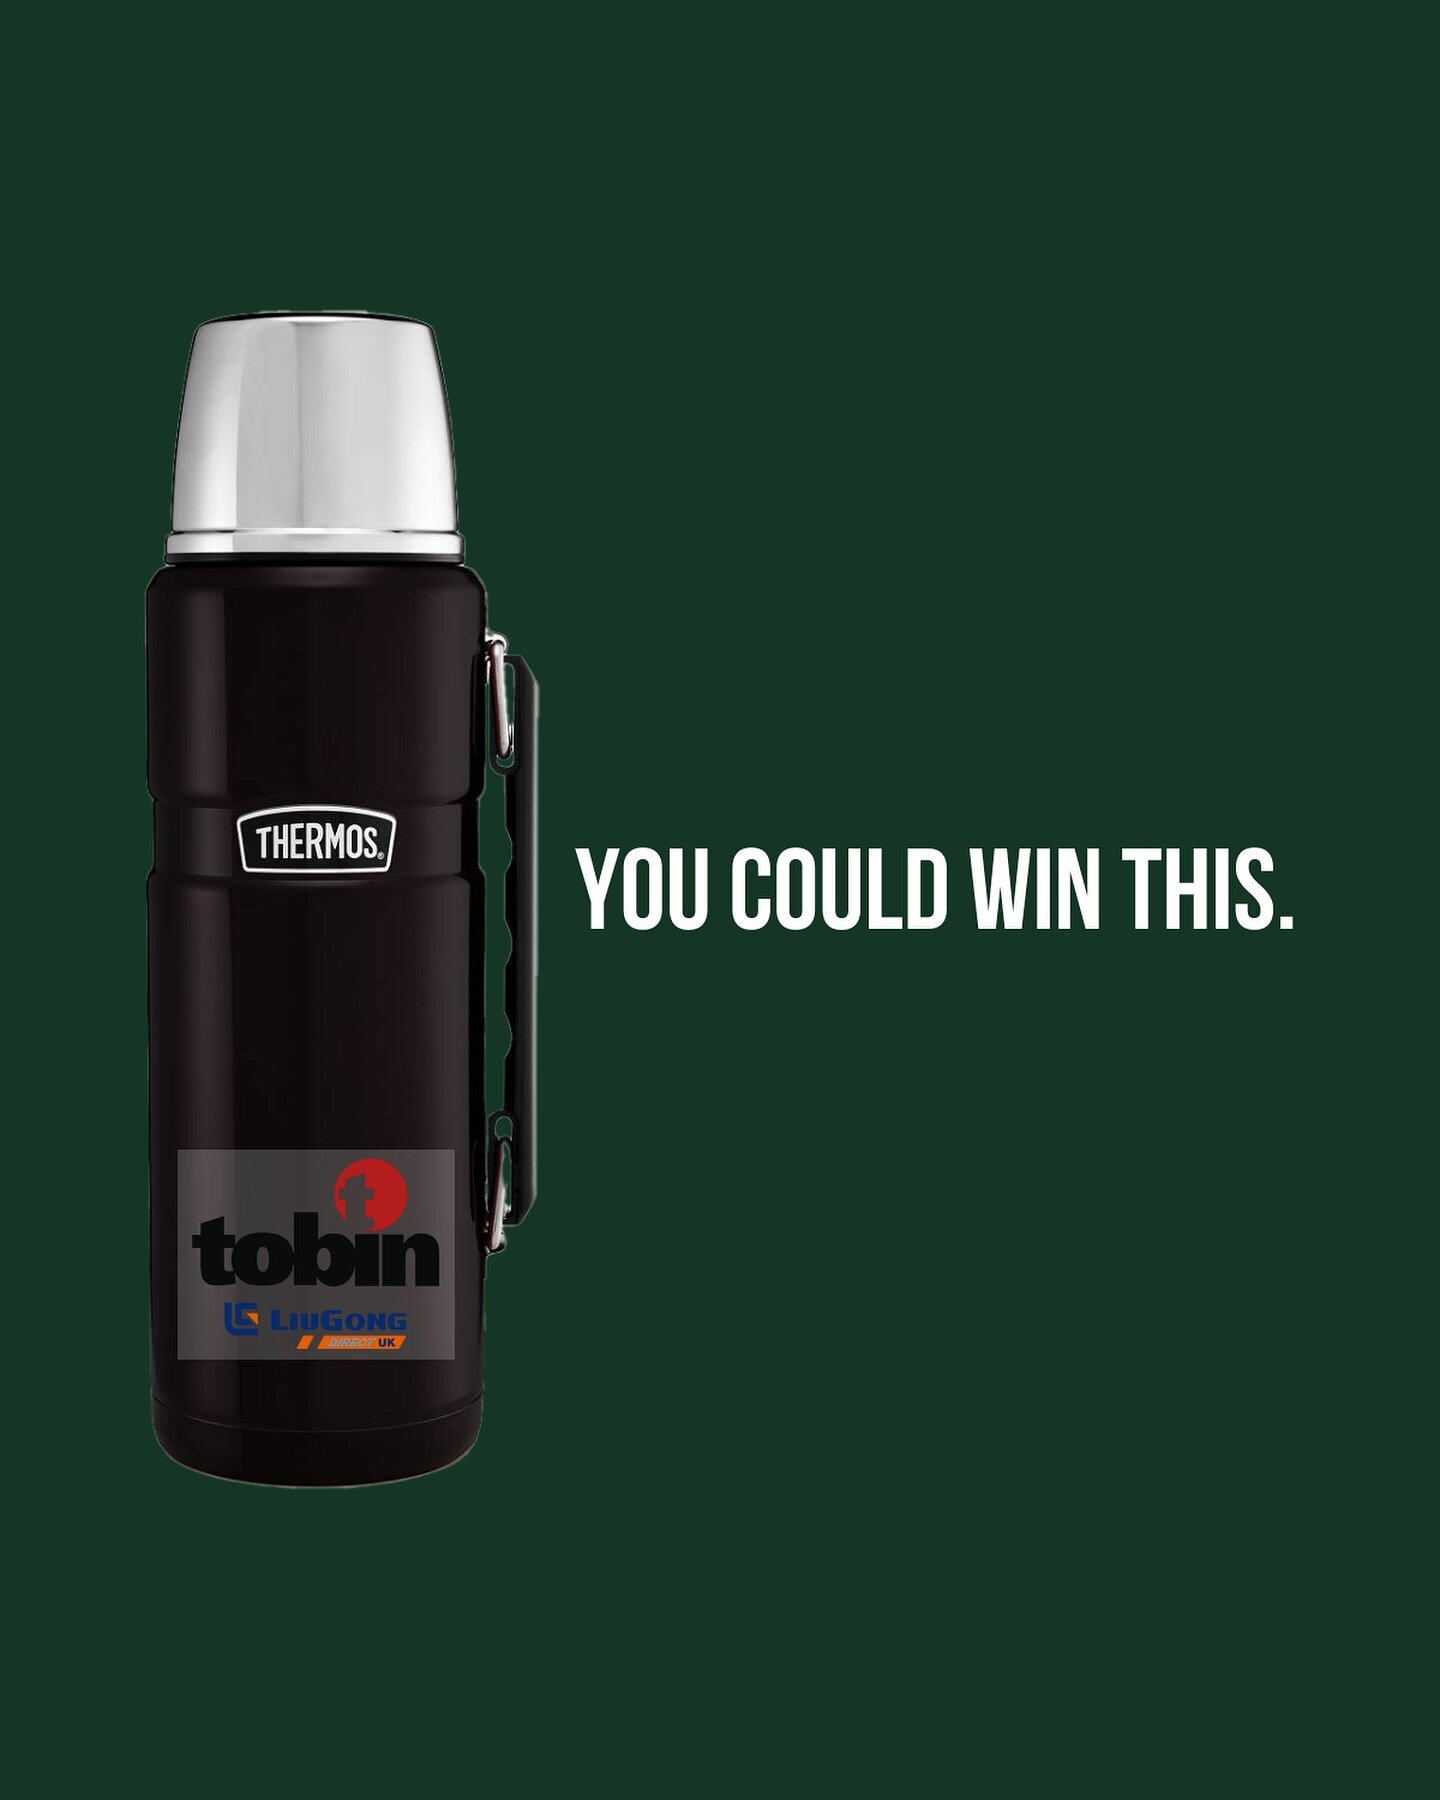 🚧 Tobin Plant LTD Christmas Giveaway Alert! 🚧 

🛠️ We know you work hard and deserve a break &ndash; so how about winning a sleek THERMOS FLASK to keep your brew hot on-site? Or cold in the summer months! ☕🔥

To enter:

1️⃣ Follow Us: Make sure y